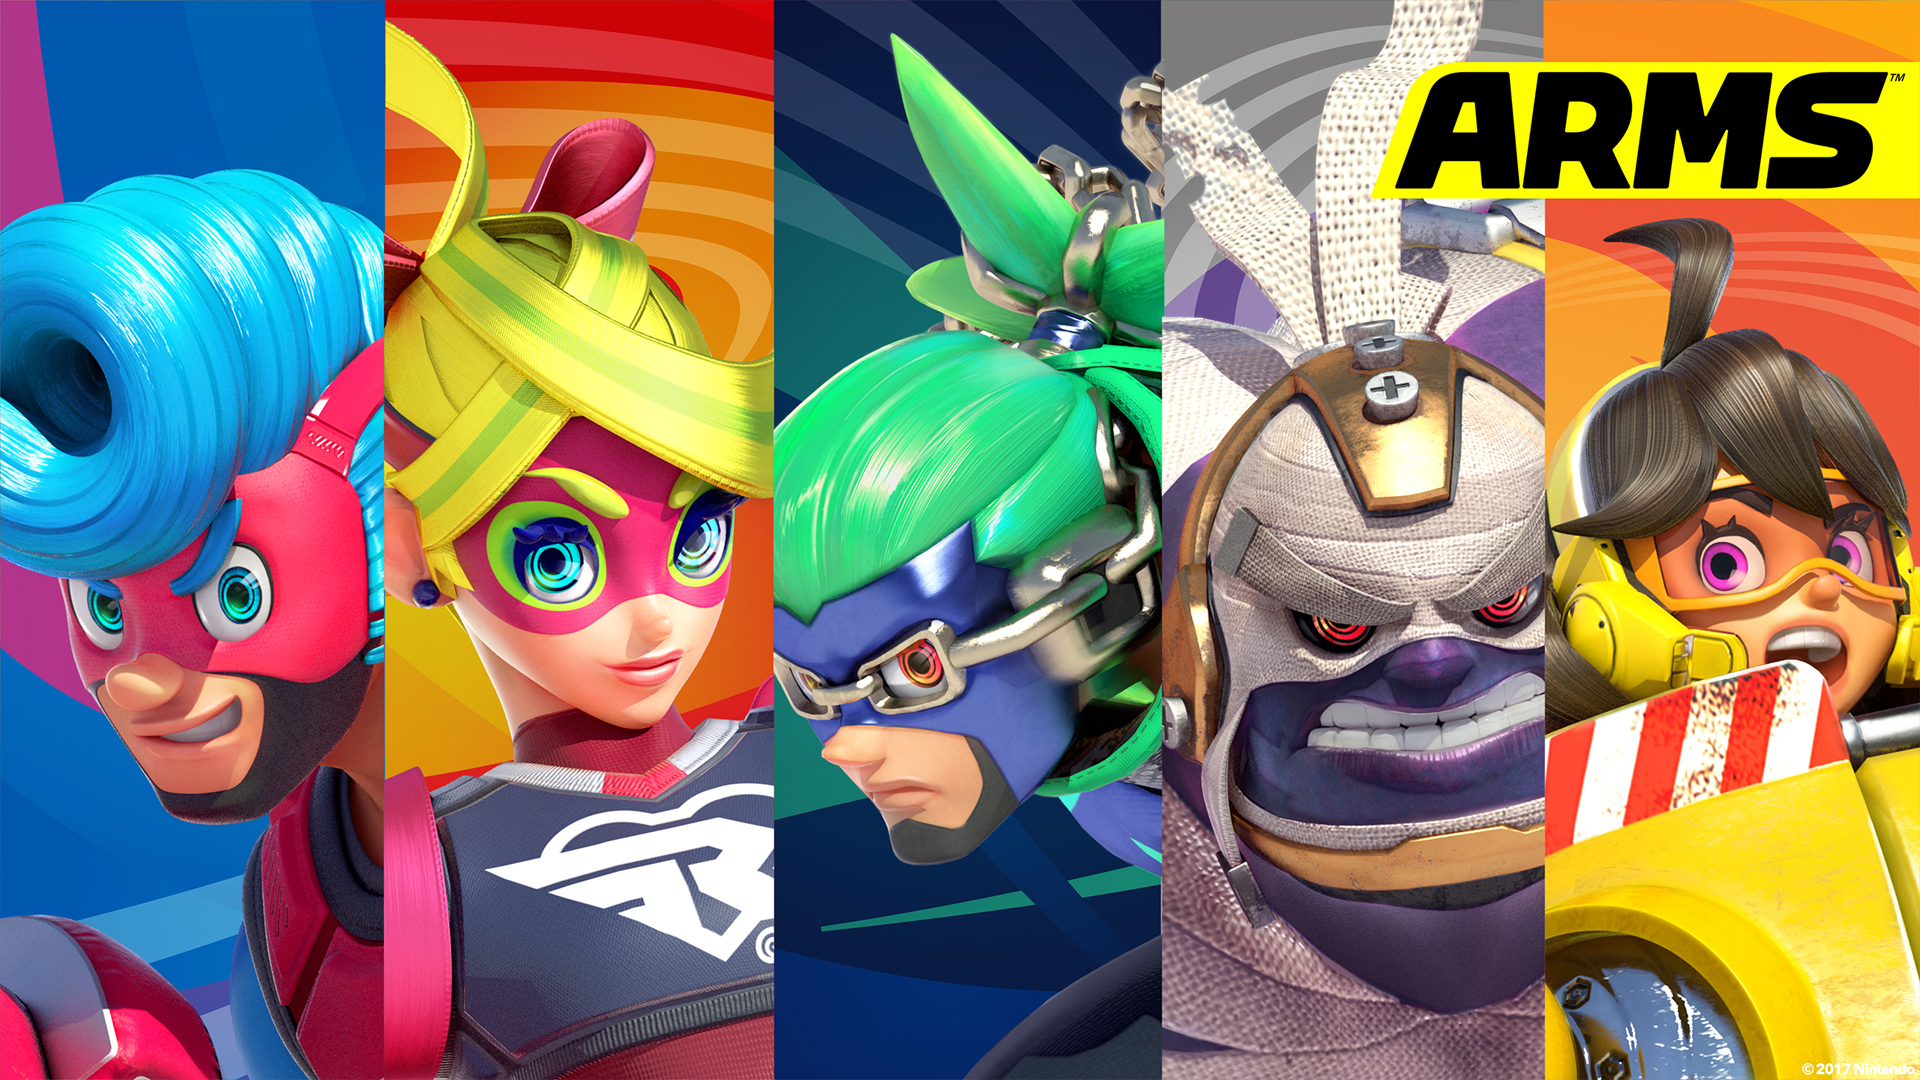 Warriors from Arms Wallpaper from Arms